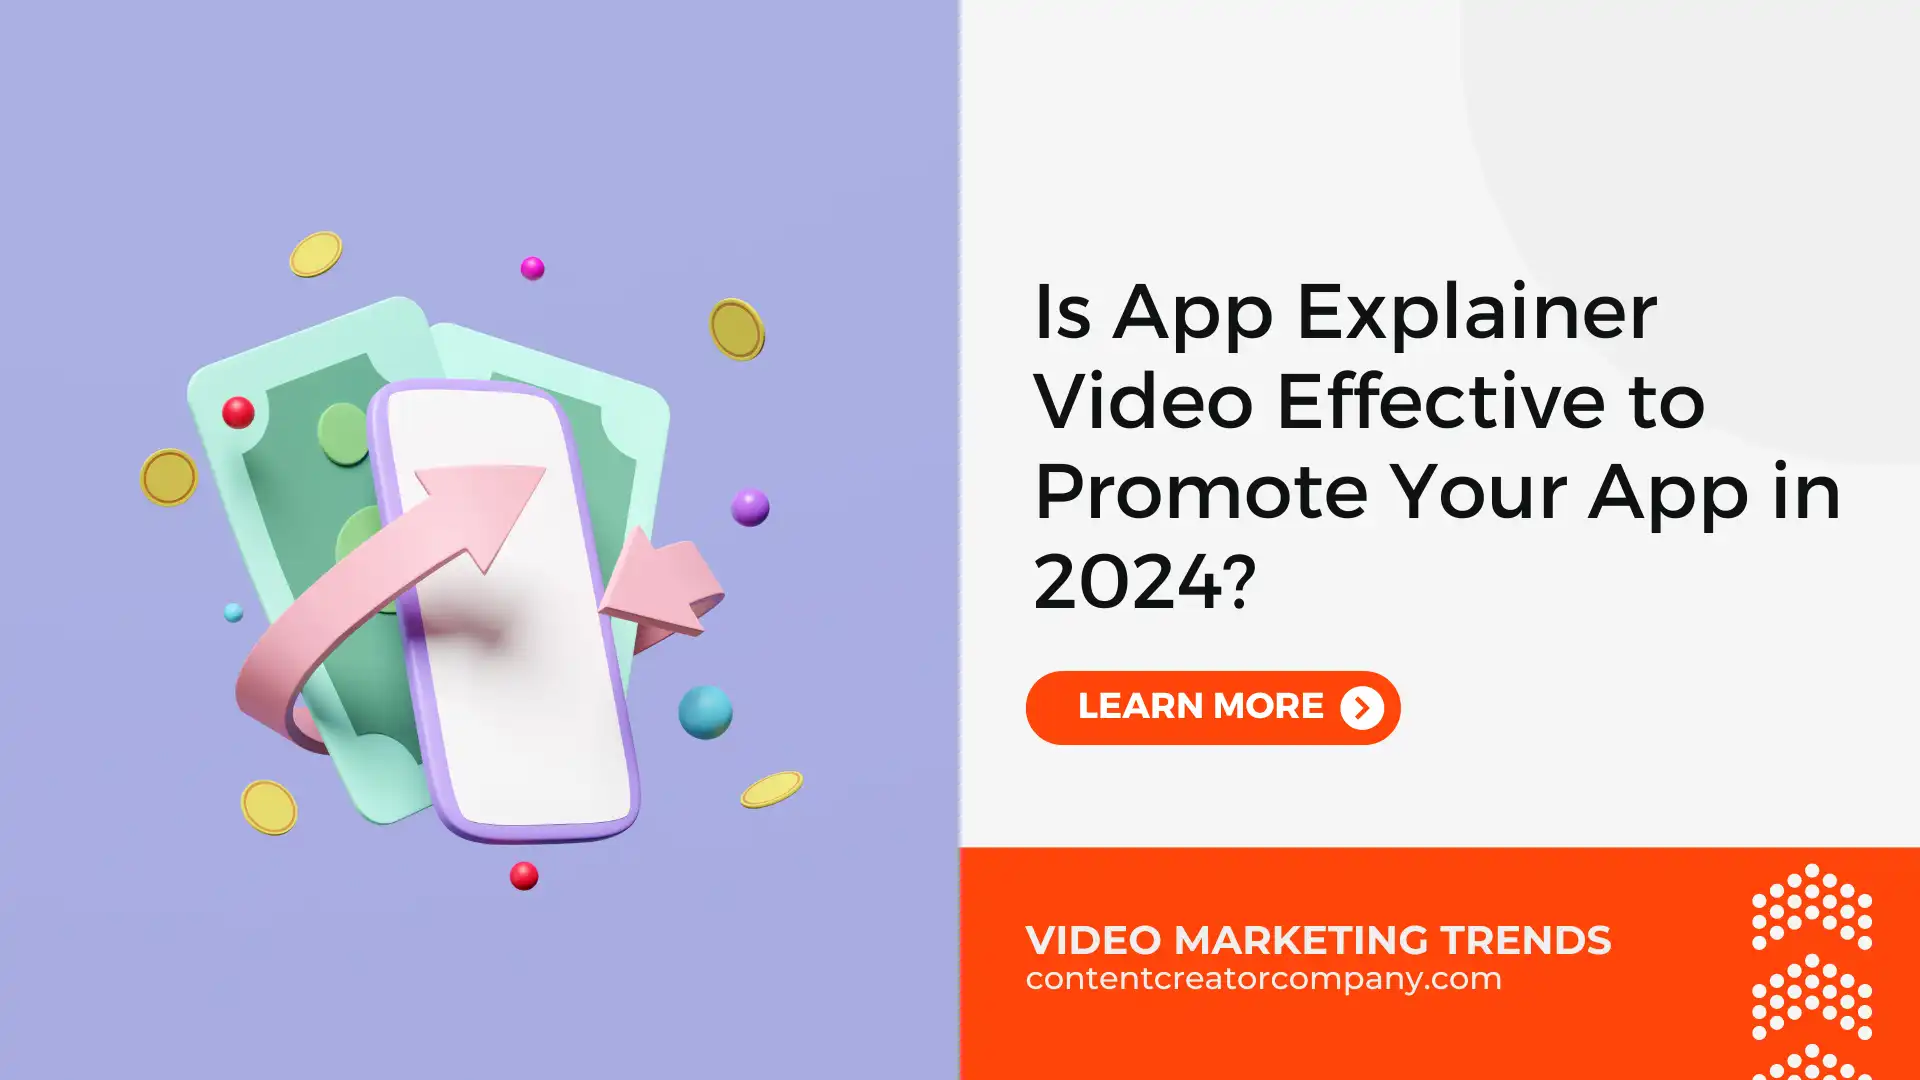 Is App Explainer Video Effective to Promote Your App in 2024?